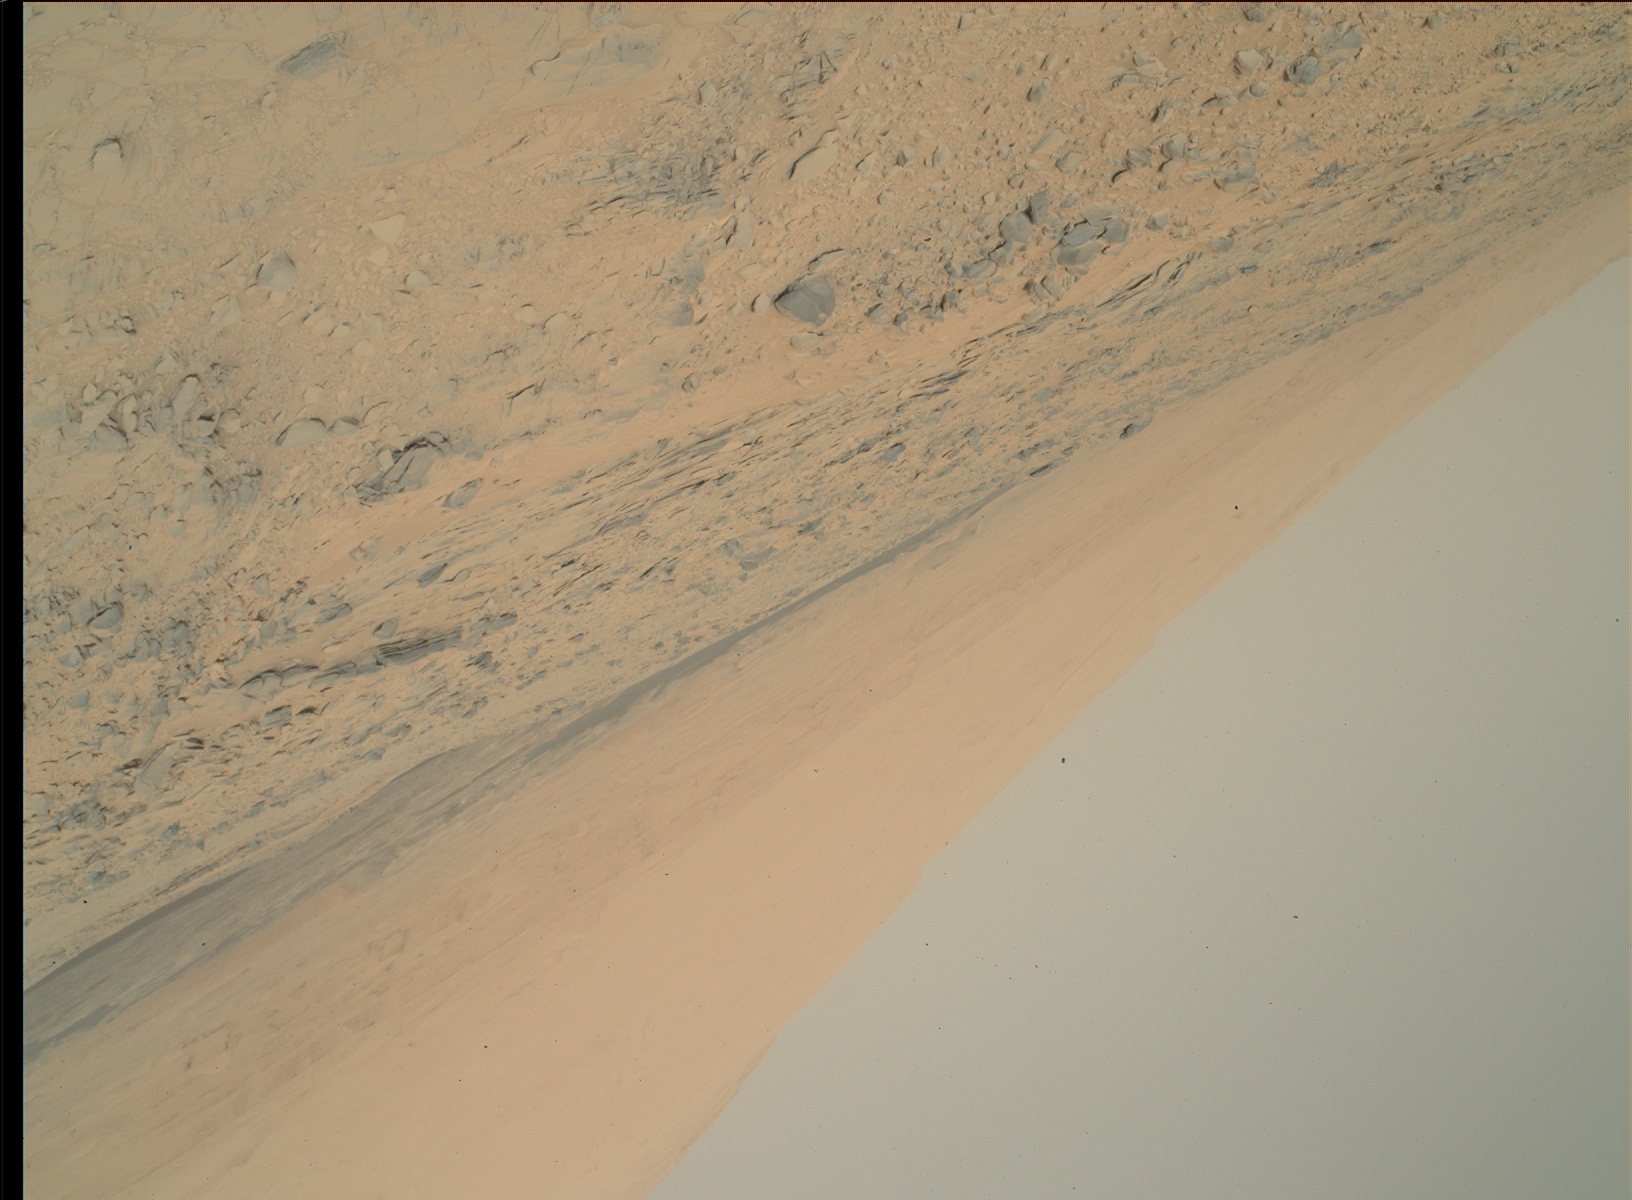 Nasa's Mars rover Curiosity acquired this image using its Mars Hand Lens Imager (MAHLI) on Sol 439